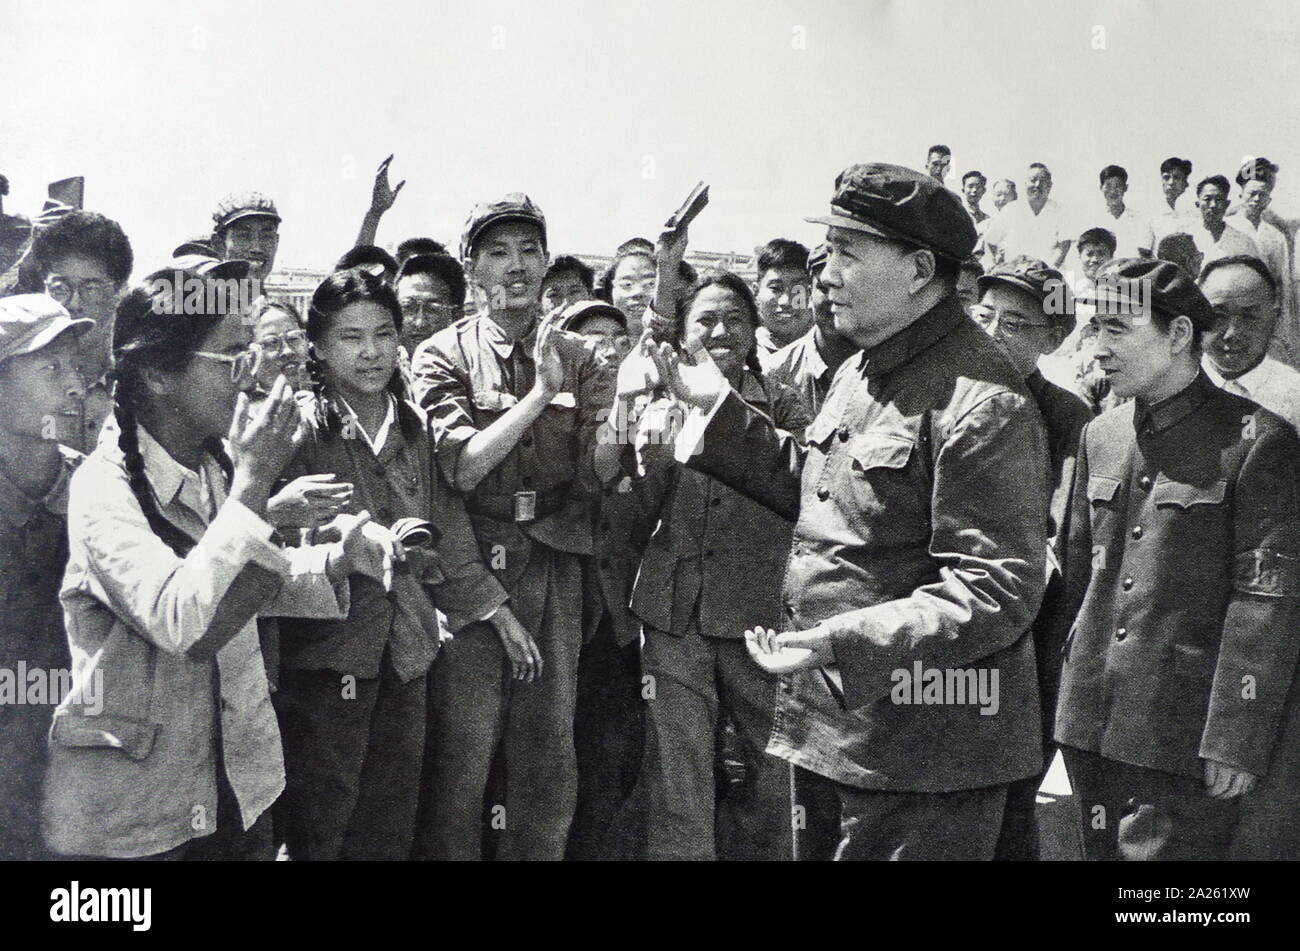 Chairman Mao with Lin Biao and Red Guards during the Cultural Revolution. 1966. Mao Zedong (1893 - September 9, 1976), was a Chinese communist revolutionary who became the founding father of the People's Republic of China (PRC), which he ruled as the Chairman of the Communist Party of China from its establishment in 1949 until his death Stock Photo